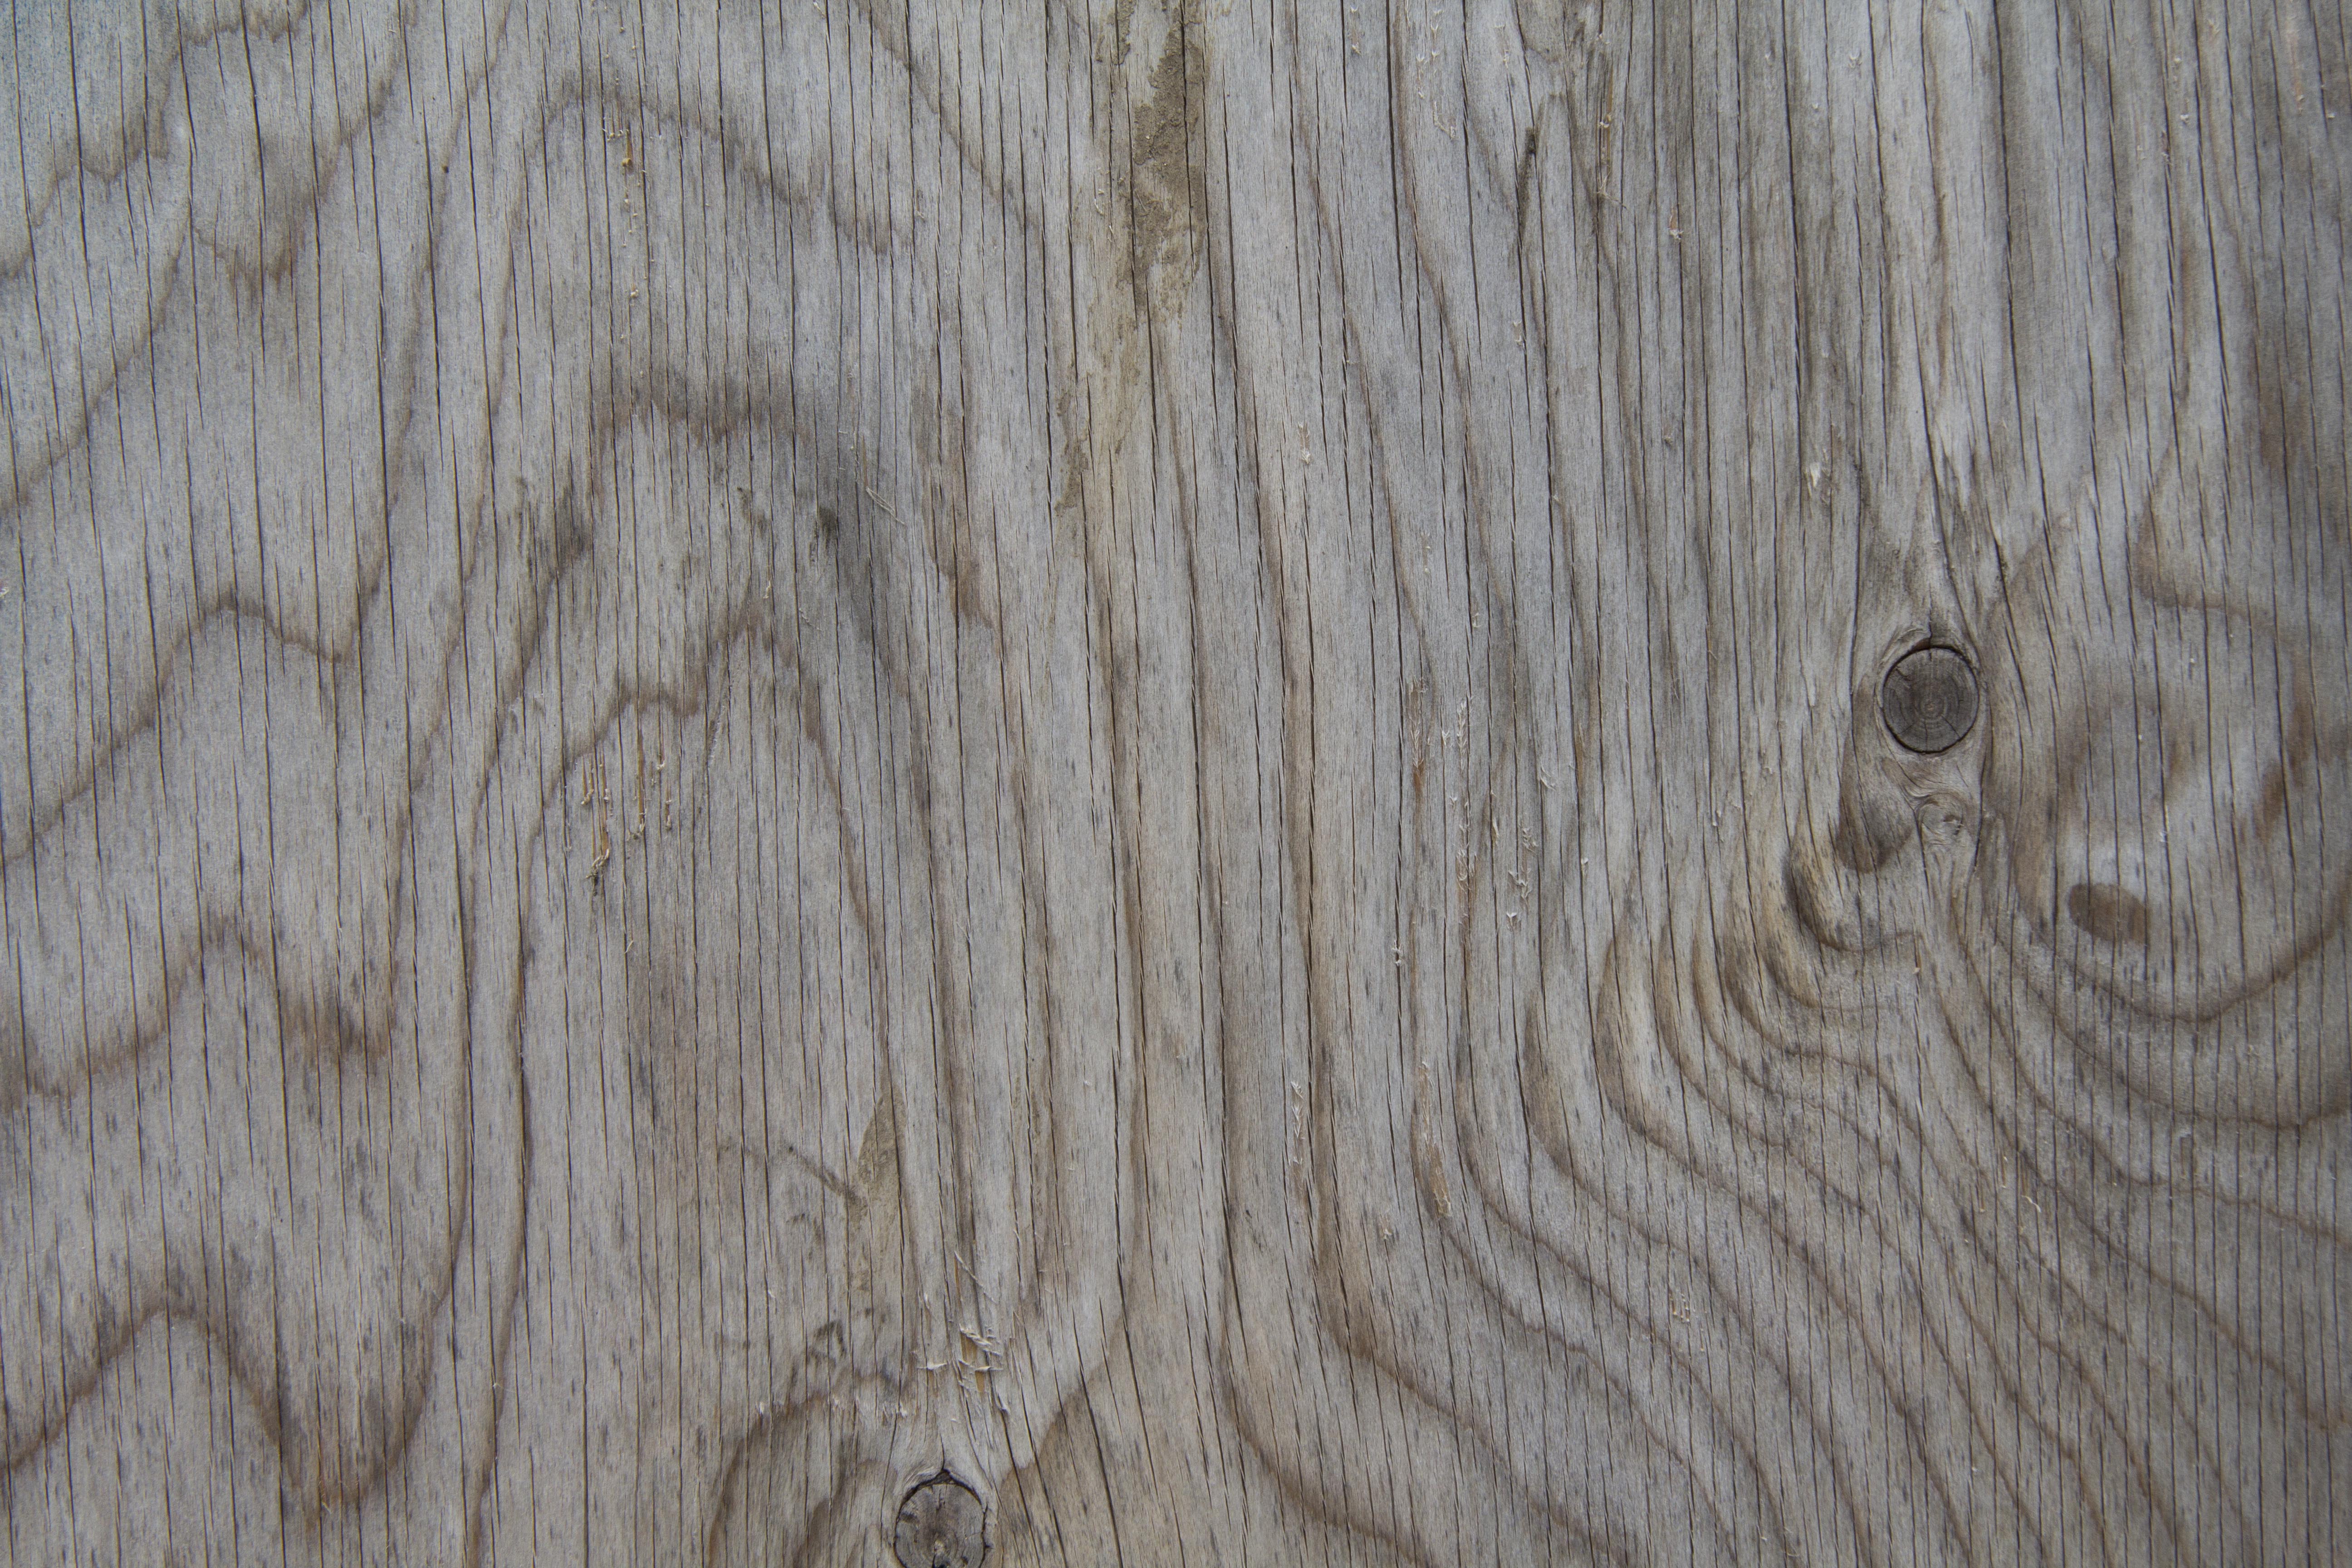 Plywood Texture « Lovelystock Textures - Free, High Quality Textures!